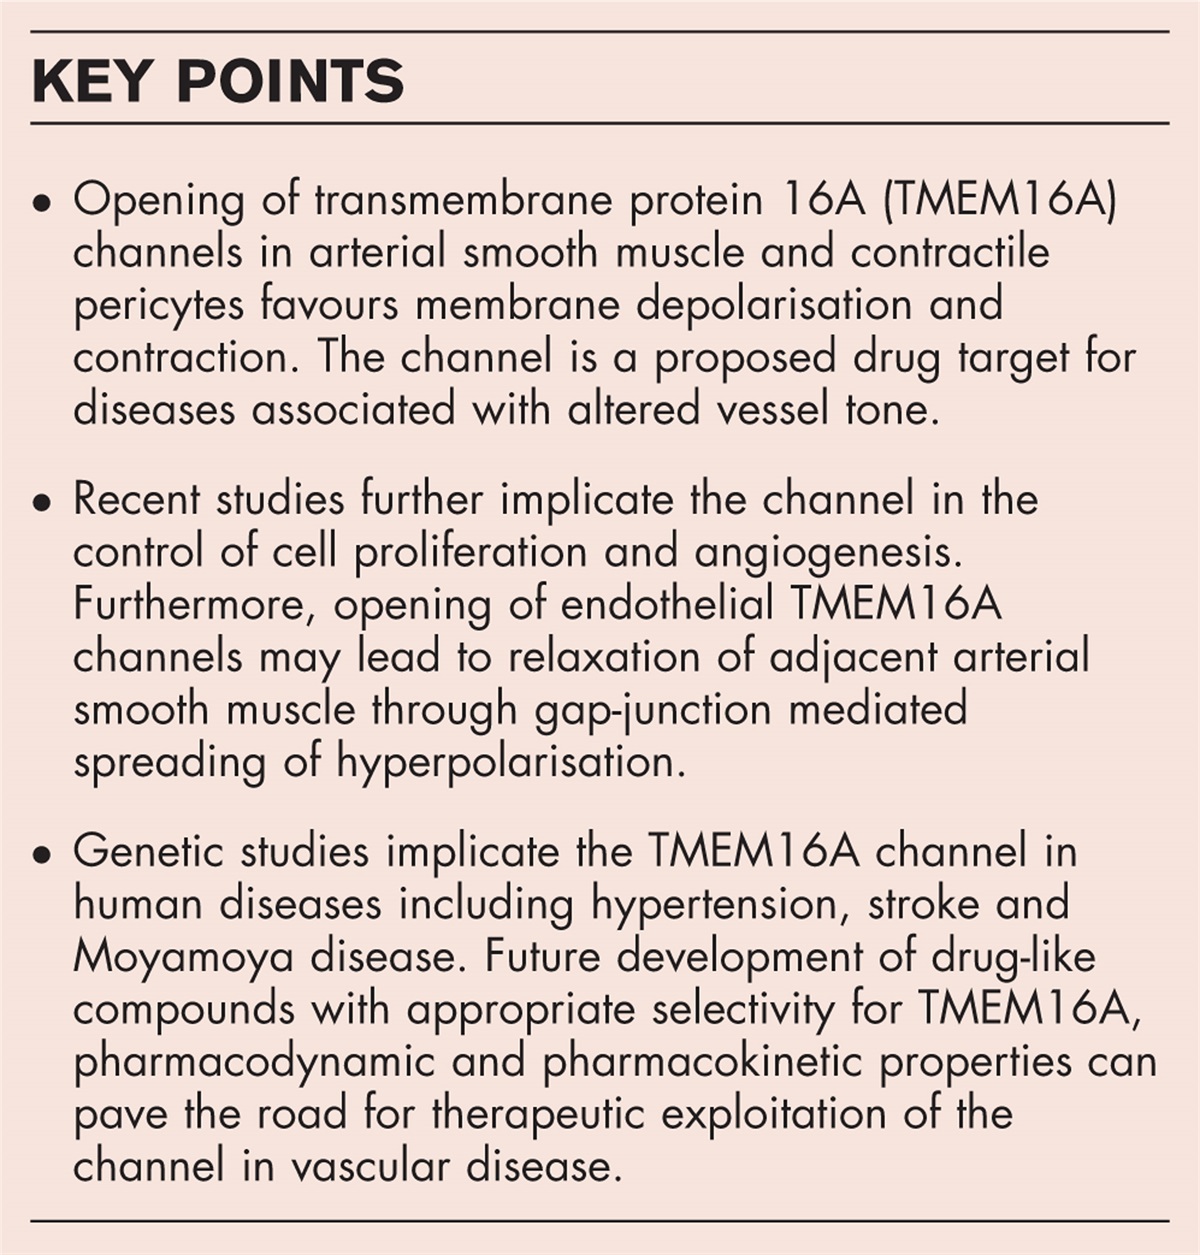 The TMEM16A channel as a potential therapeutic target in vascular disease